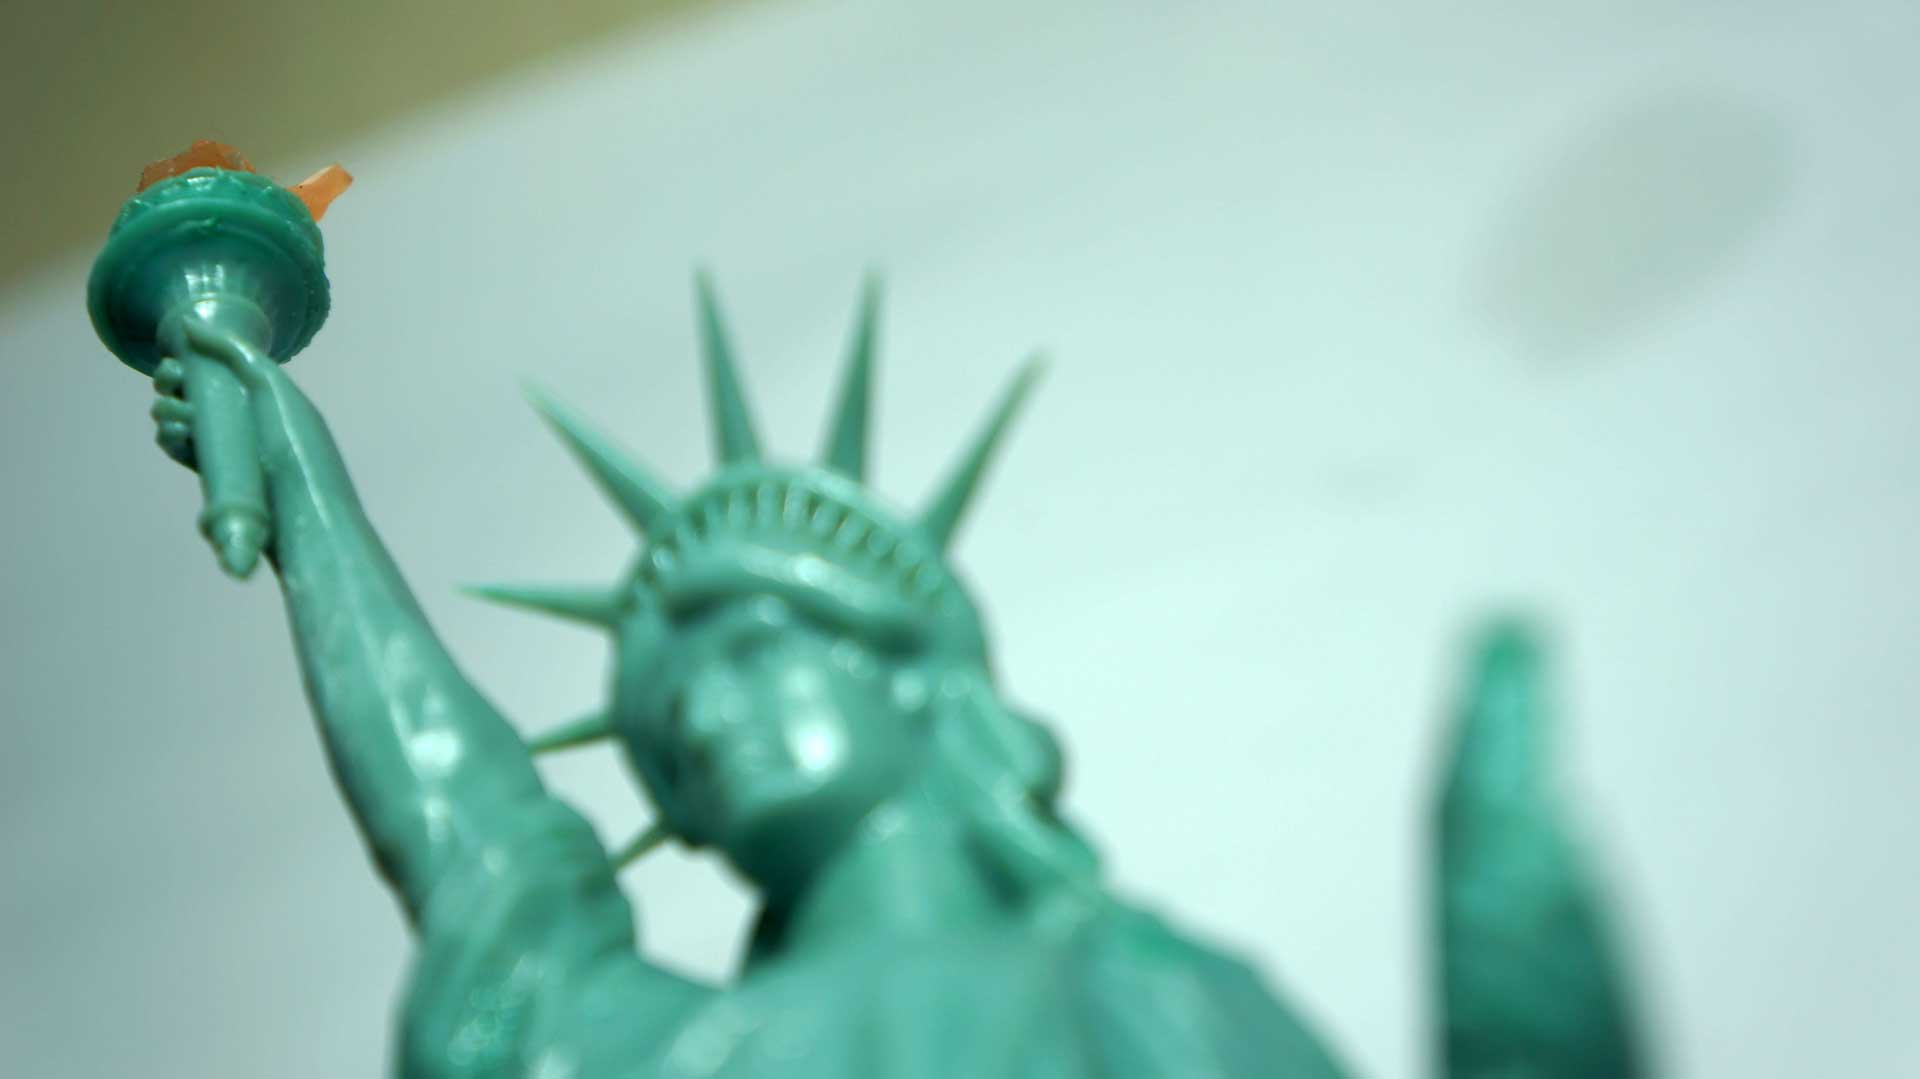 Printed two colors Statue of Liberty with Kudo3D Titan 1 SLA 3D printer